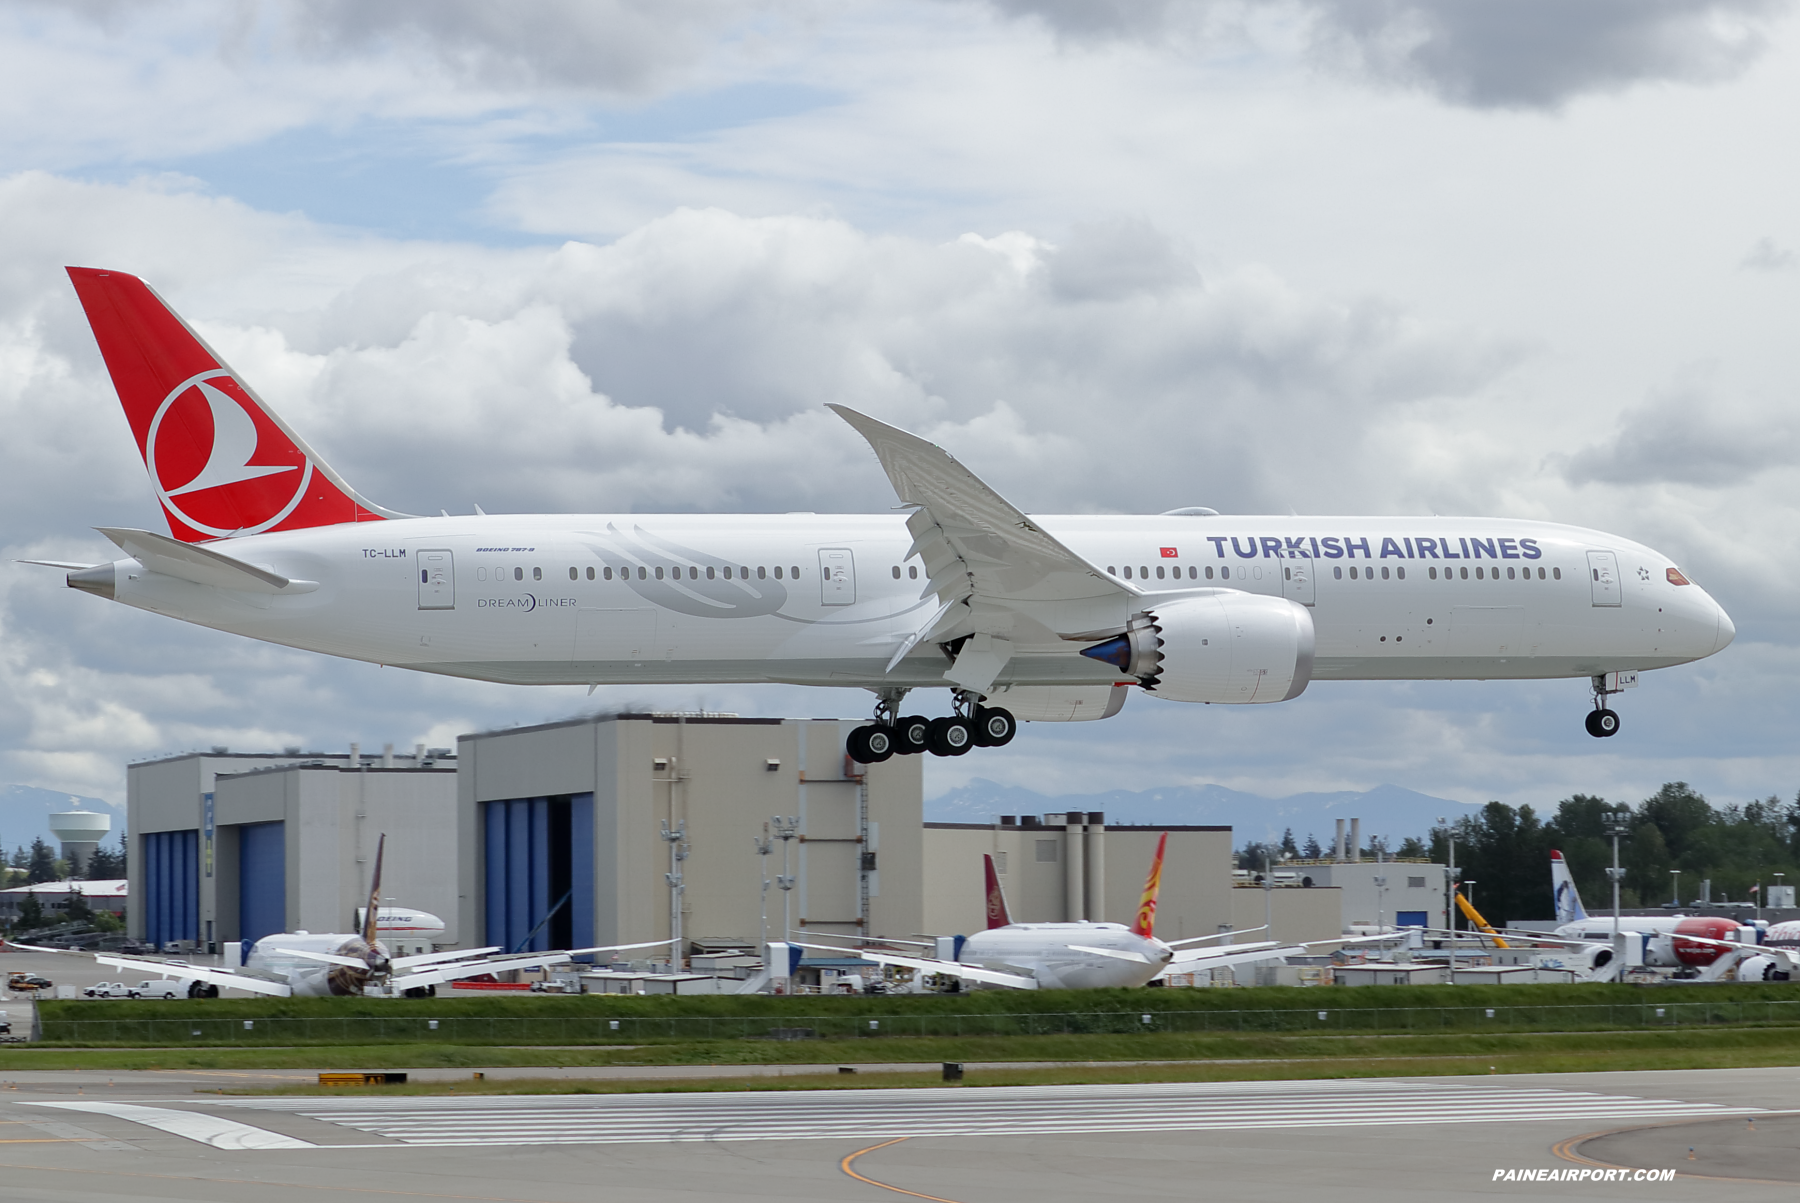 Turkish Airlines 787-9 TC-LLM at Paine Field